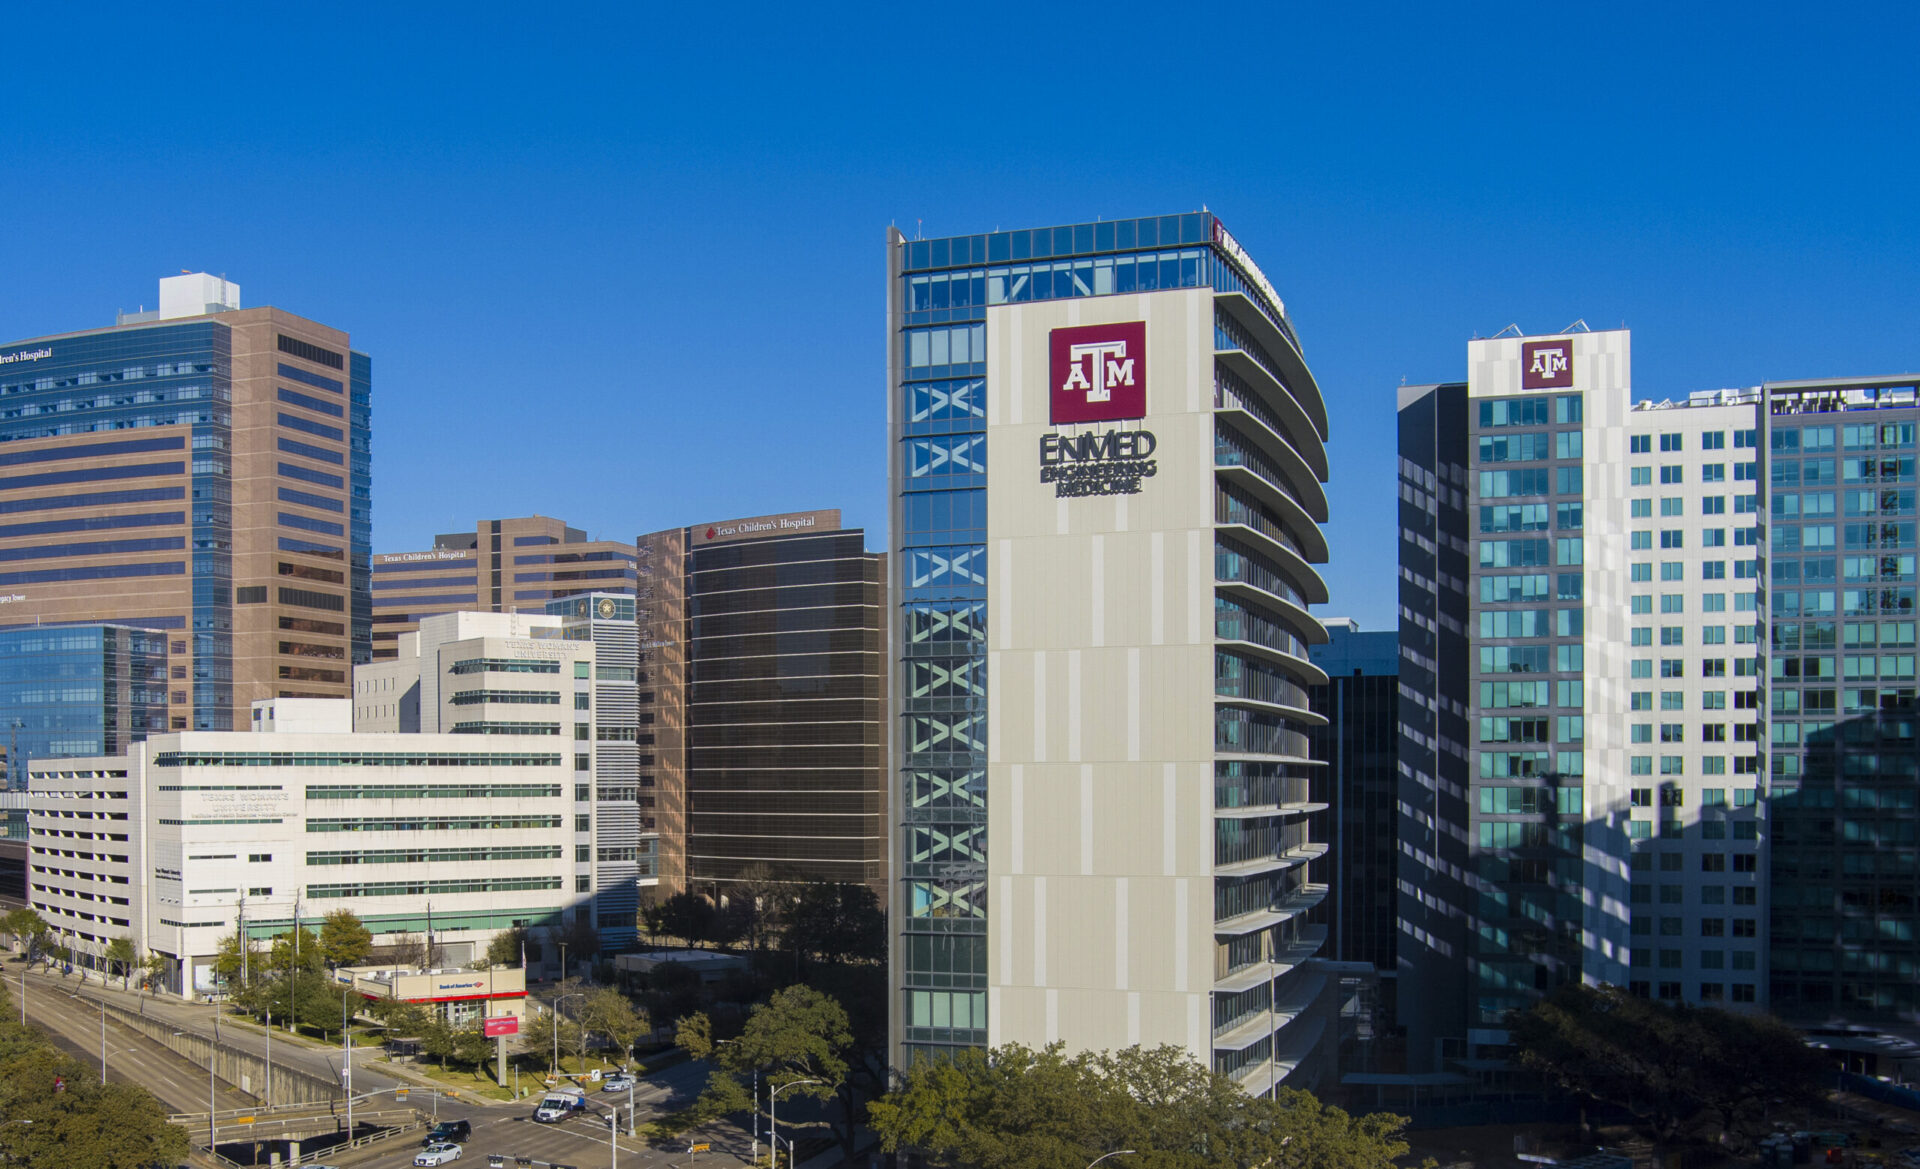 The ENMED building is located in the Texas Medical Center at 1020 Holcombe Blvd., Houston, TX 77030.